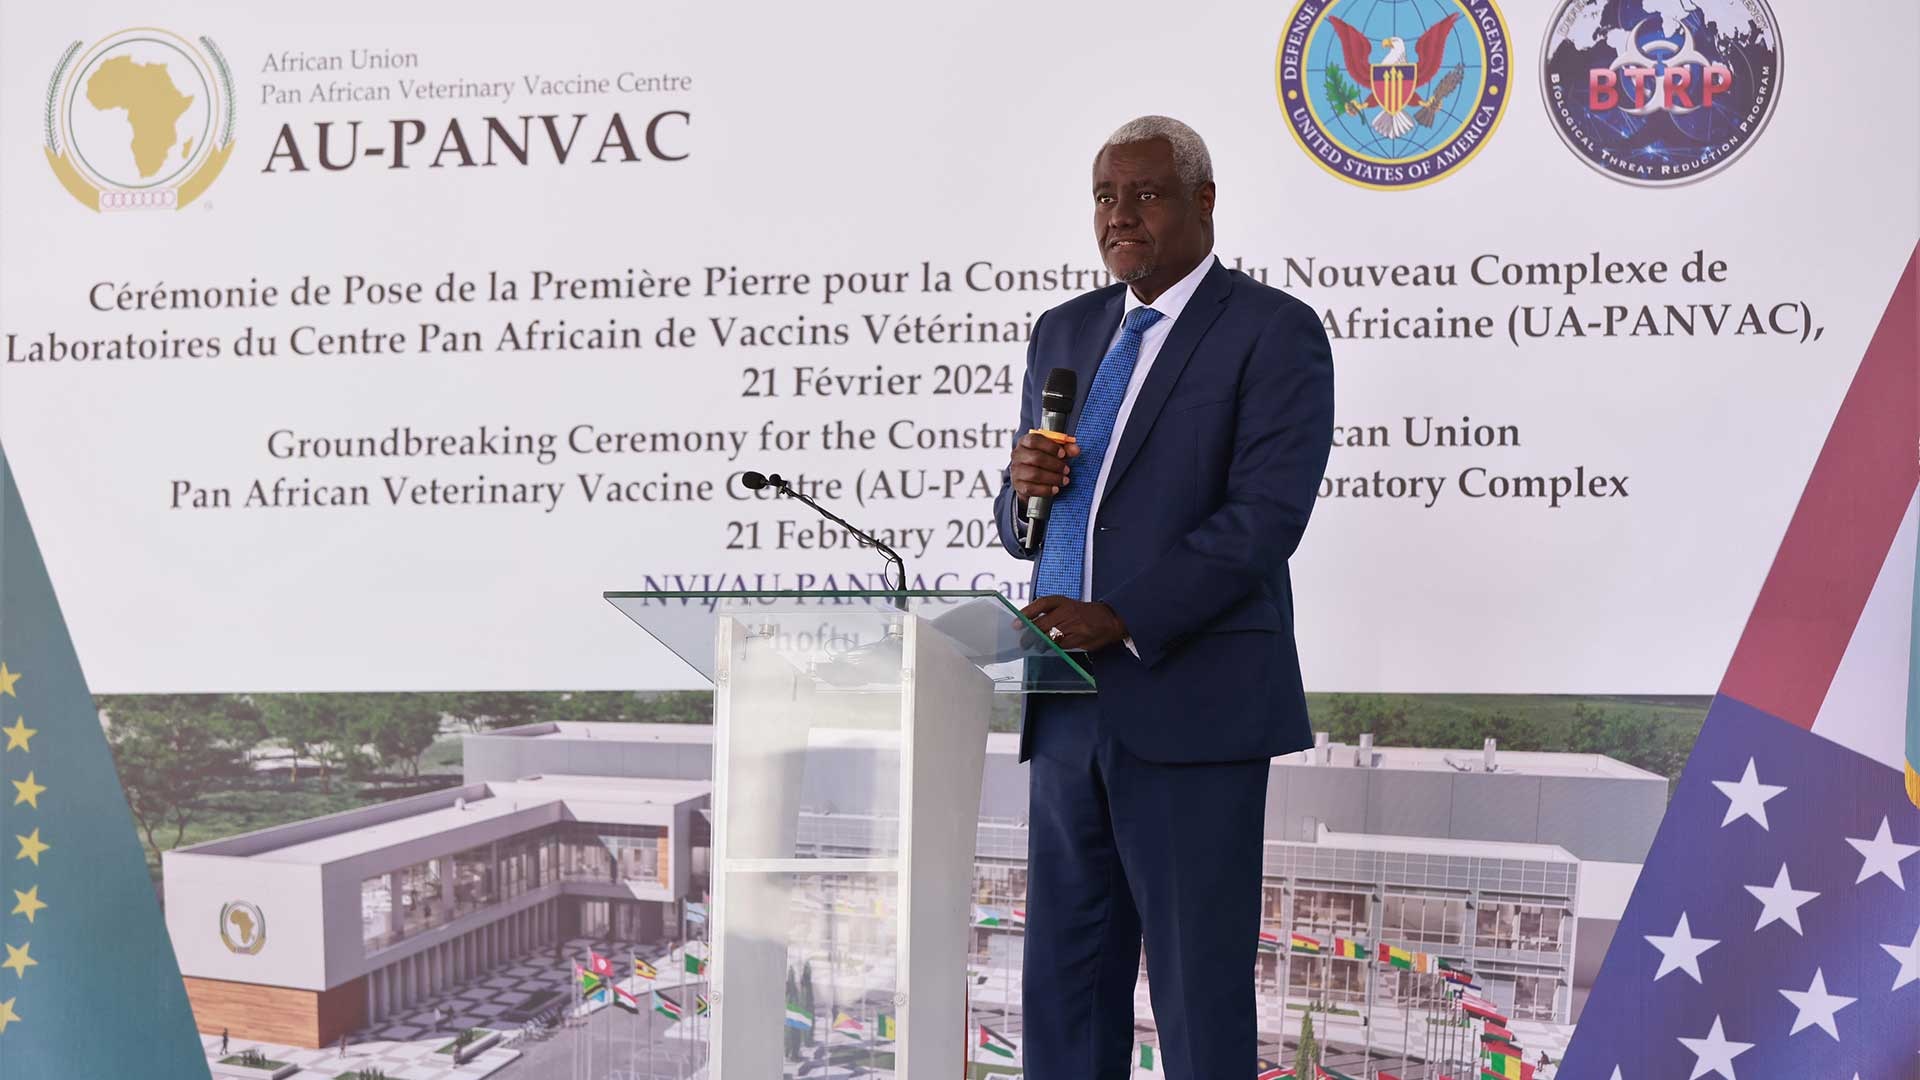 Members of the Defense Threat Reduction Agency (DTRA) participated in a ground-breaking ceremony for the new African Union (AU)-Pan-African Veterinary Vaccine Center (PANVAC) laboratory and training center in Bishoftu, Ethiopia Feb 21.